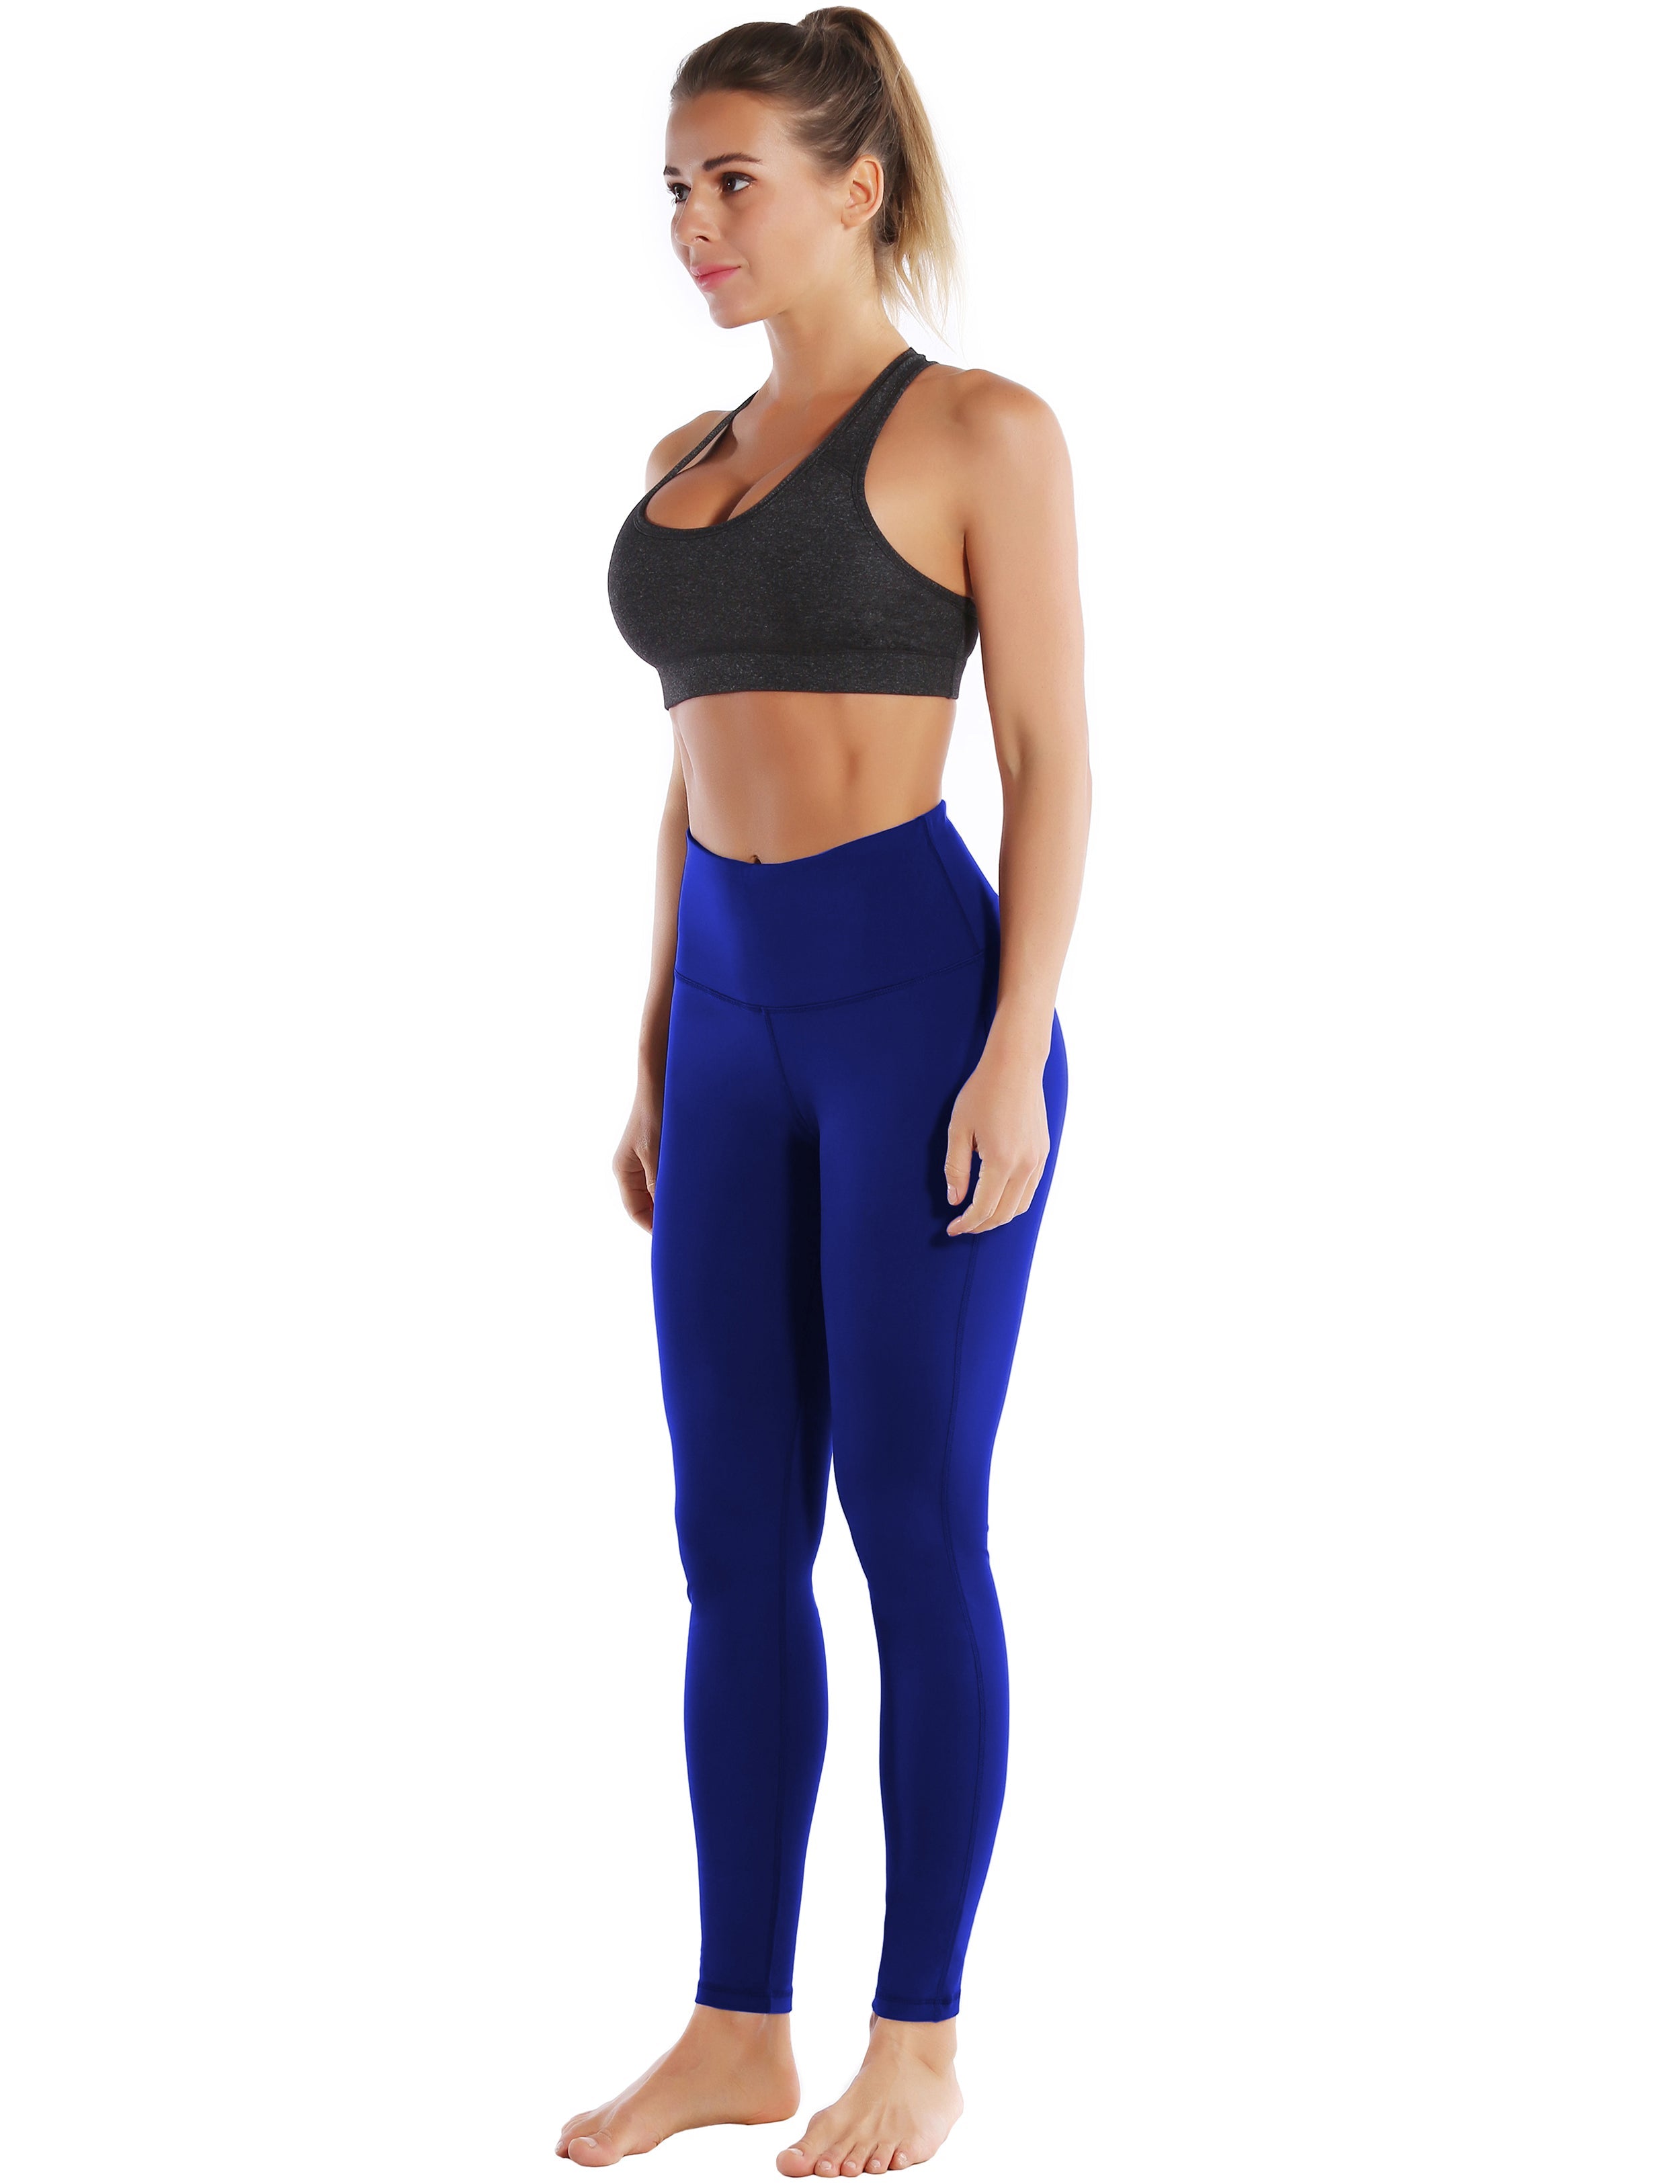 High Waist Side Line Pilates Pants navy Side Line is Make Your Legs Look Longer and Thinner 75%Nylon/25%Spandex Fabric doesn't attract lint easily 4-way stretch No see-through Moisture-wicking Tummy control Inner pocket Two lengths